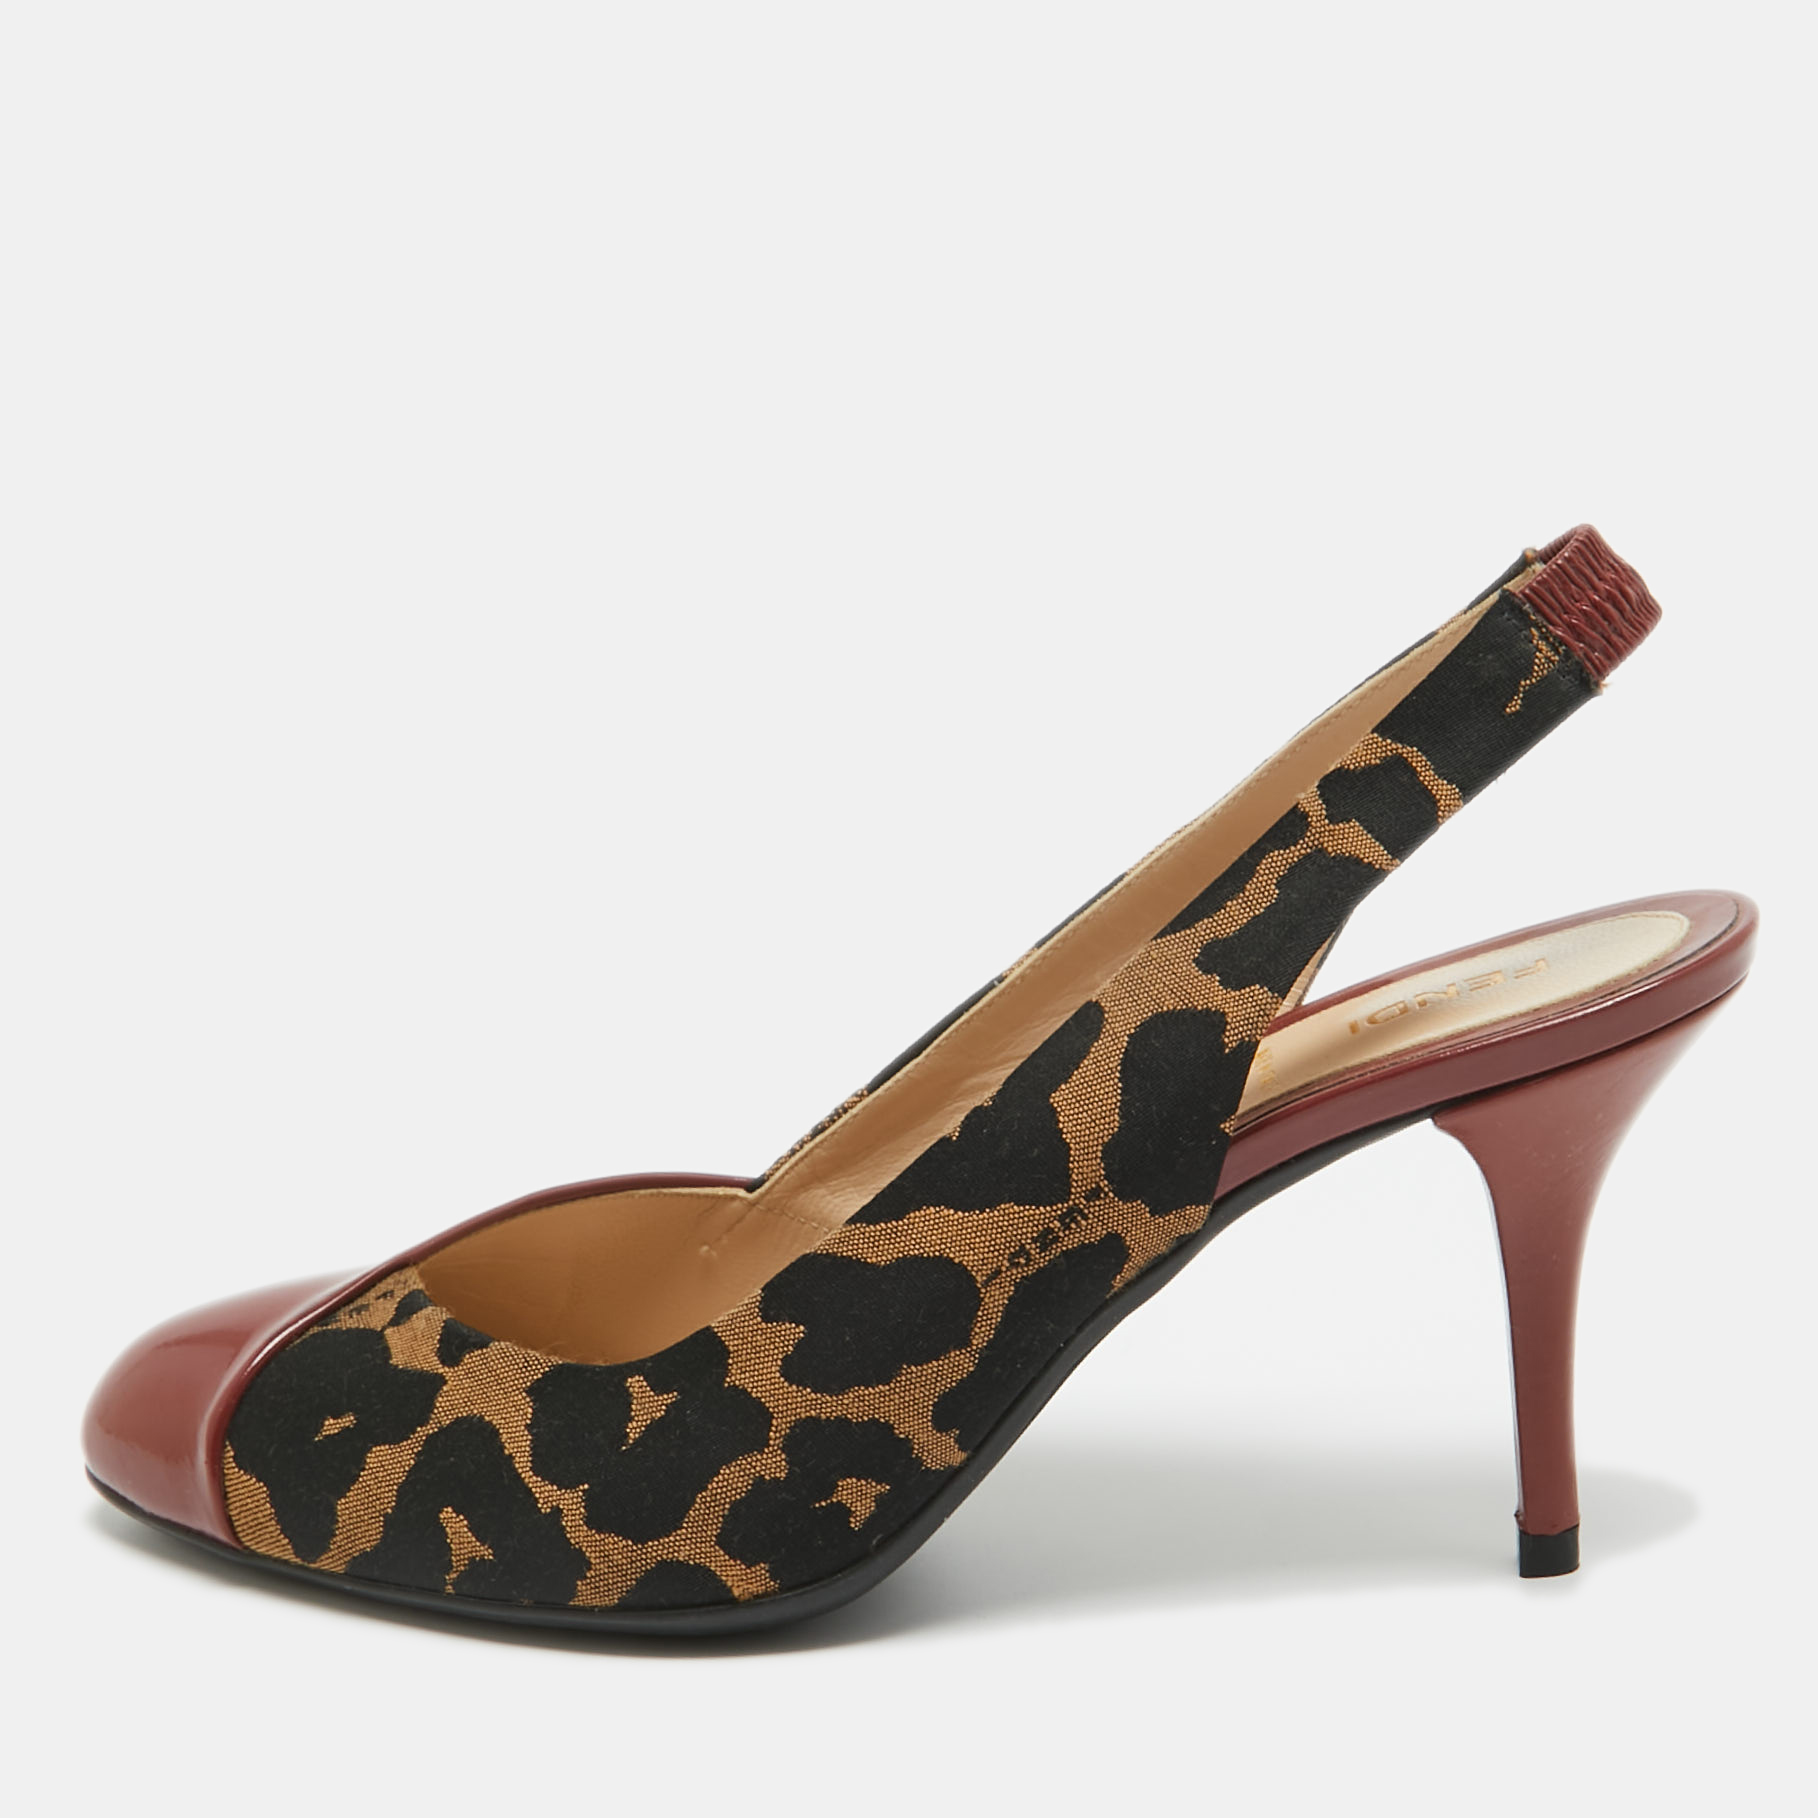 Fendi Red/Brown Patent and Canvas Slingback Pumps Size 38 